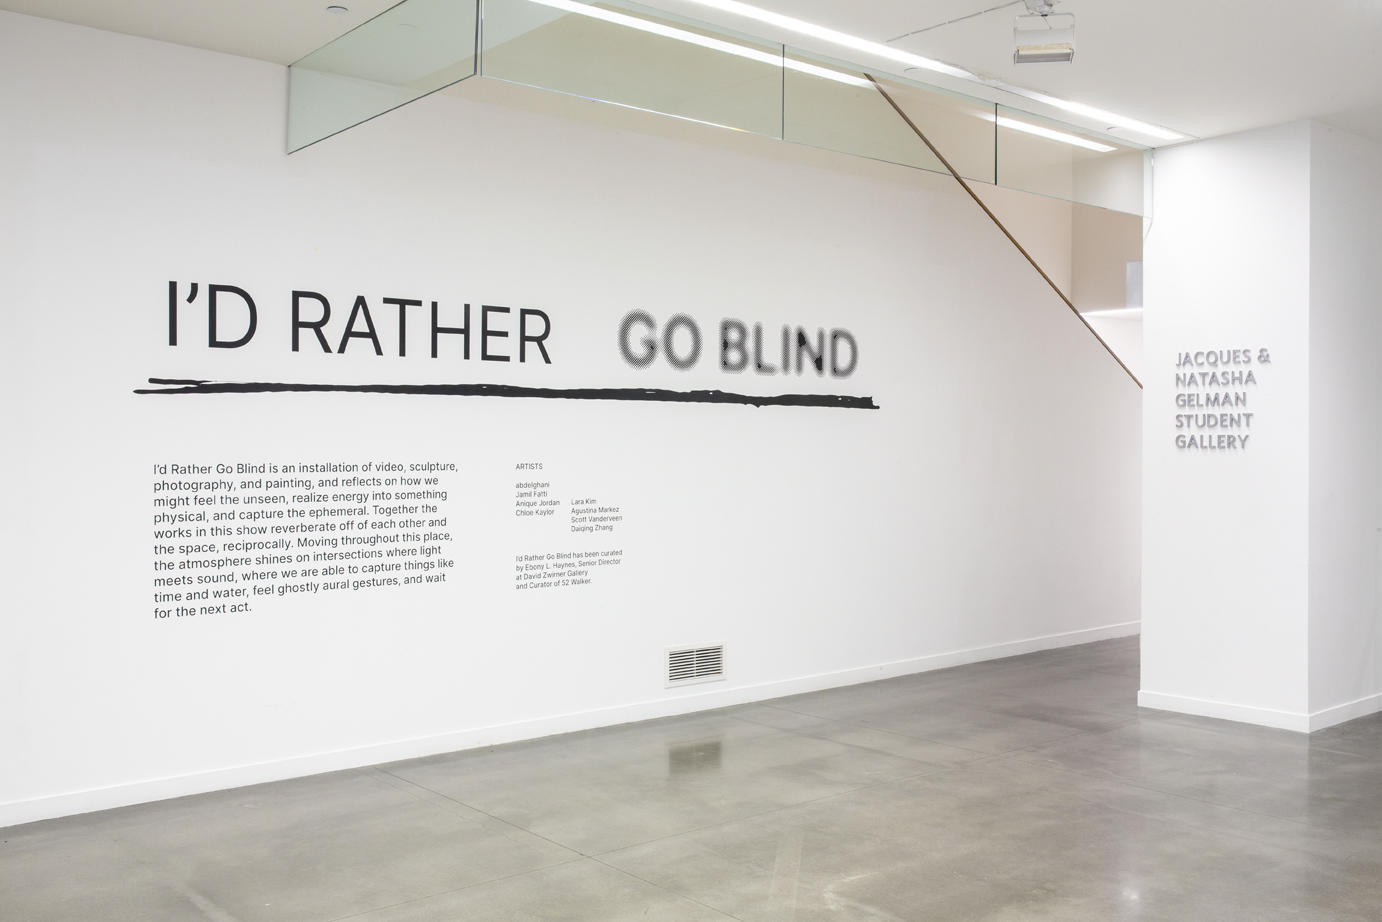 photo of wall vinyl showing exhibition title (I'd Rather Go Blind) and curatorial essay